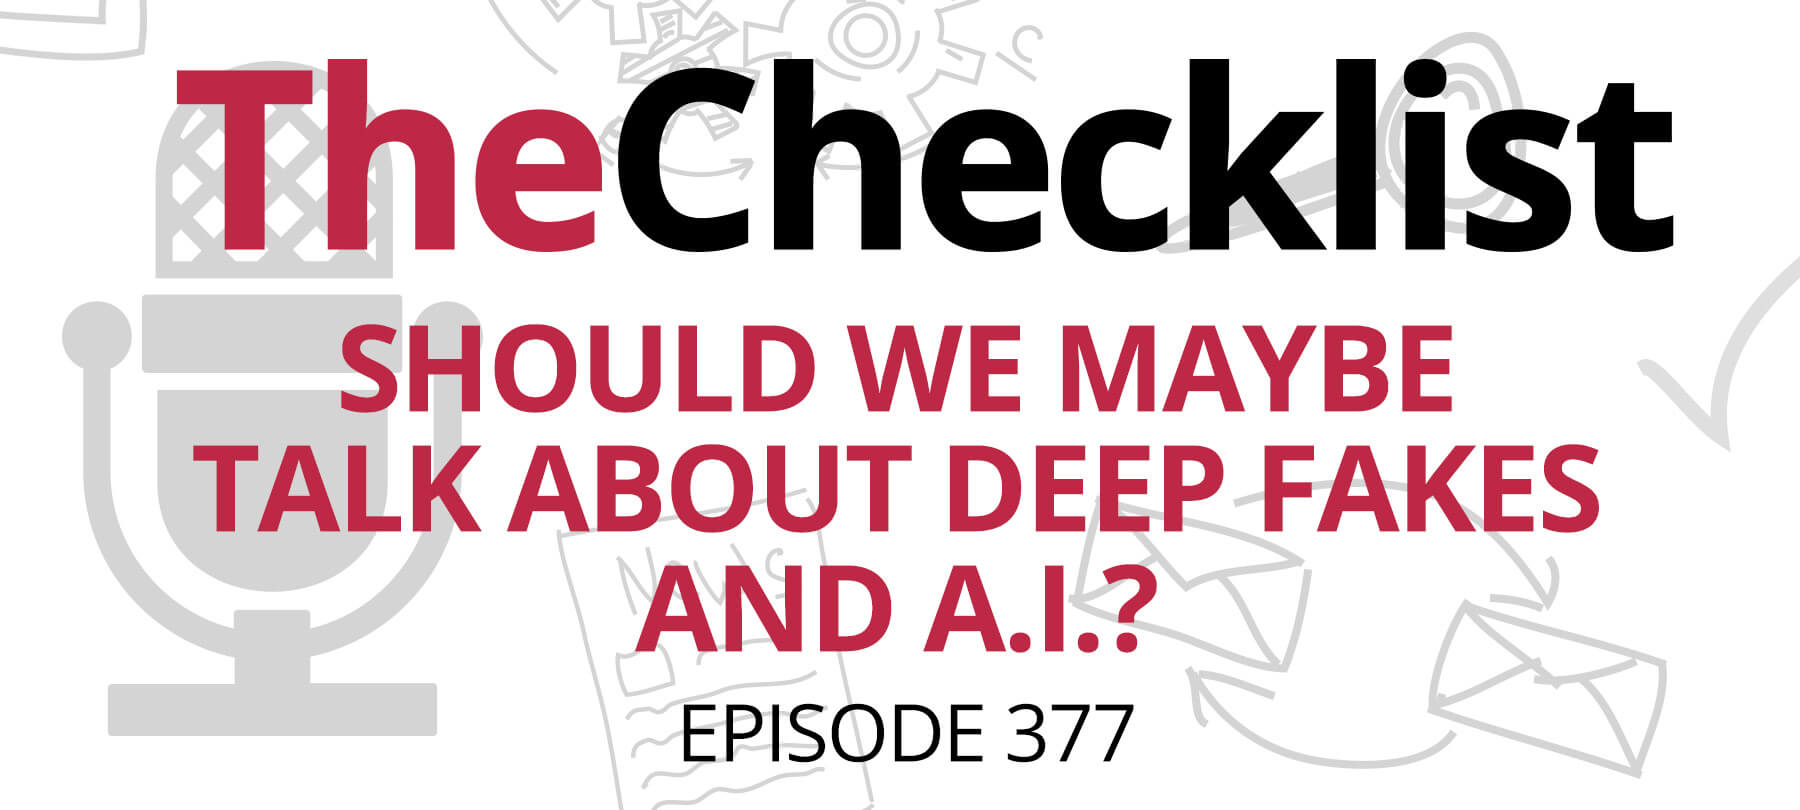 Checklist 377 header image: Should we maybe talk about deep fakes and ai? written in red rext